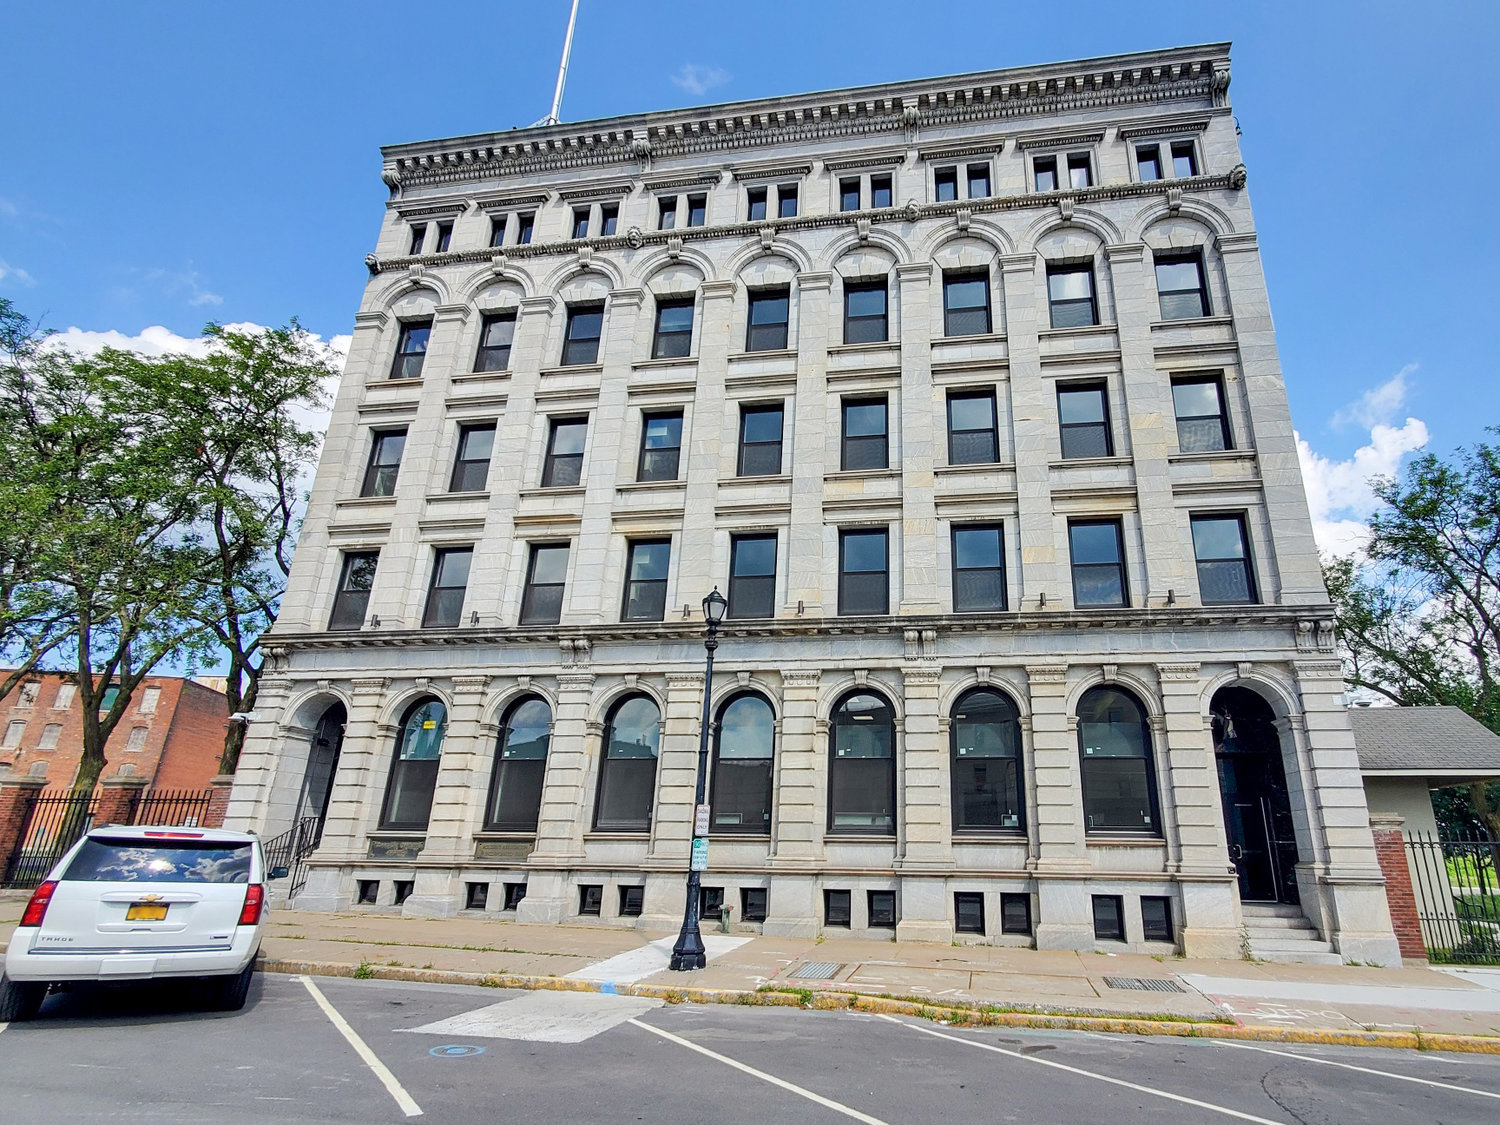 The exterior of the Commercial Travelers Insurance building at 70 Genesee St. is shown in this file photo.